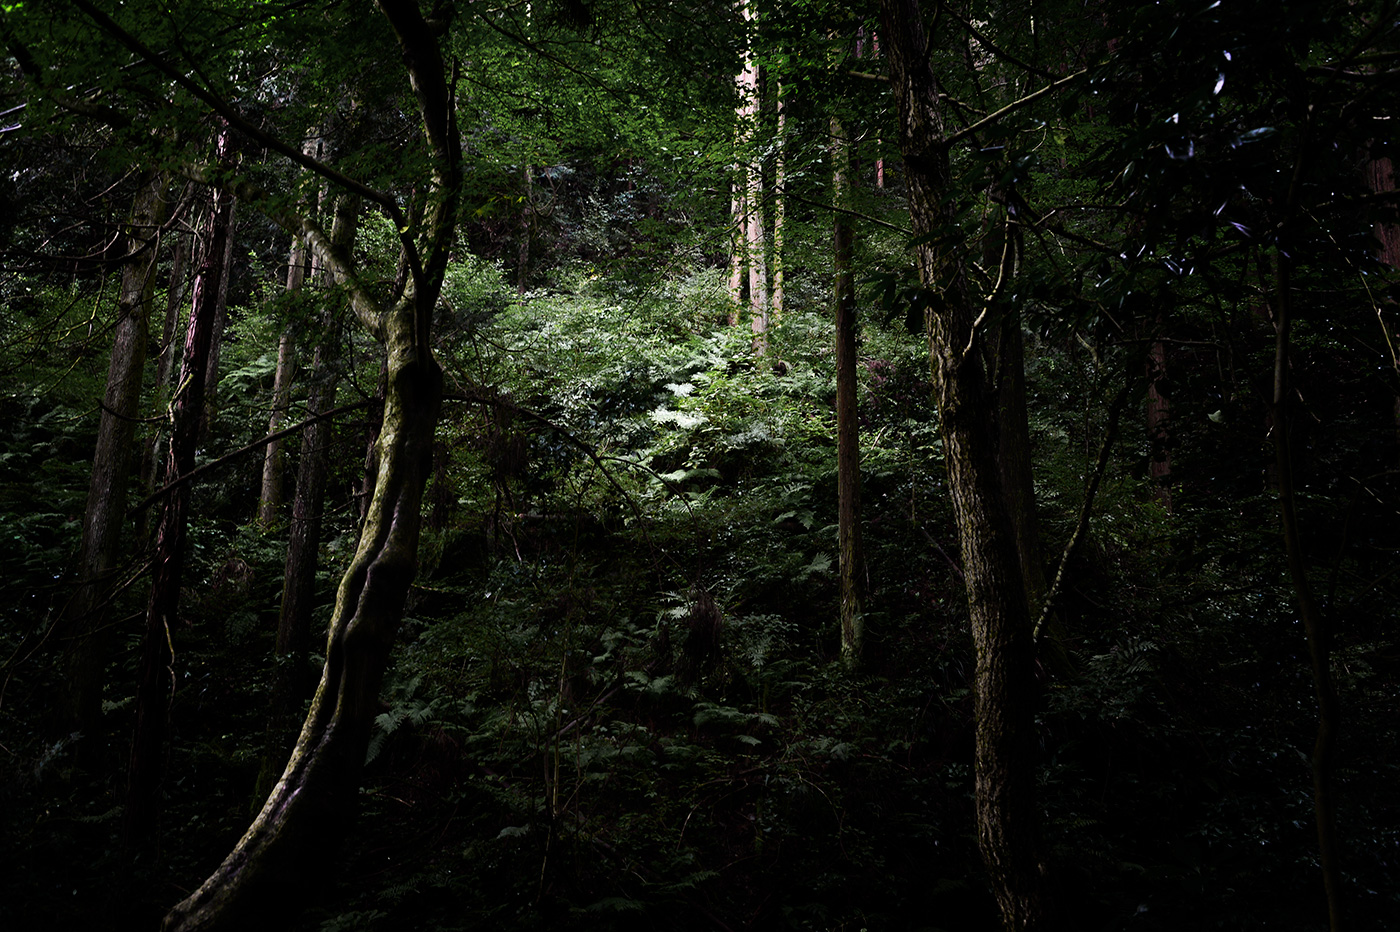 The Japanese Forest